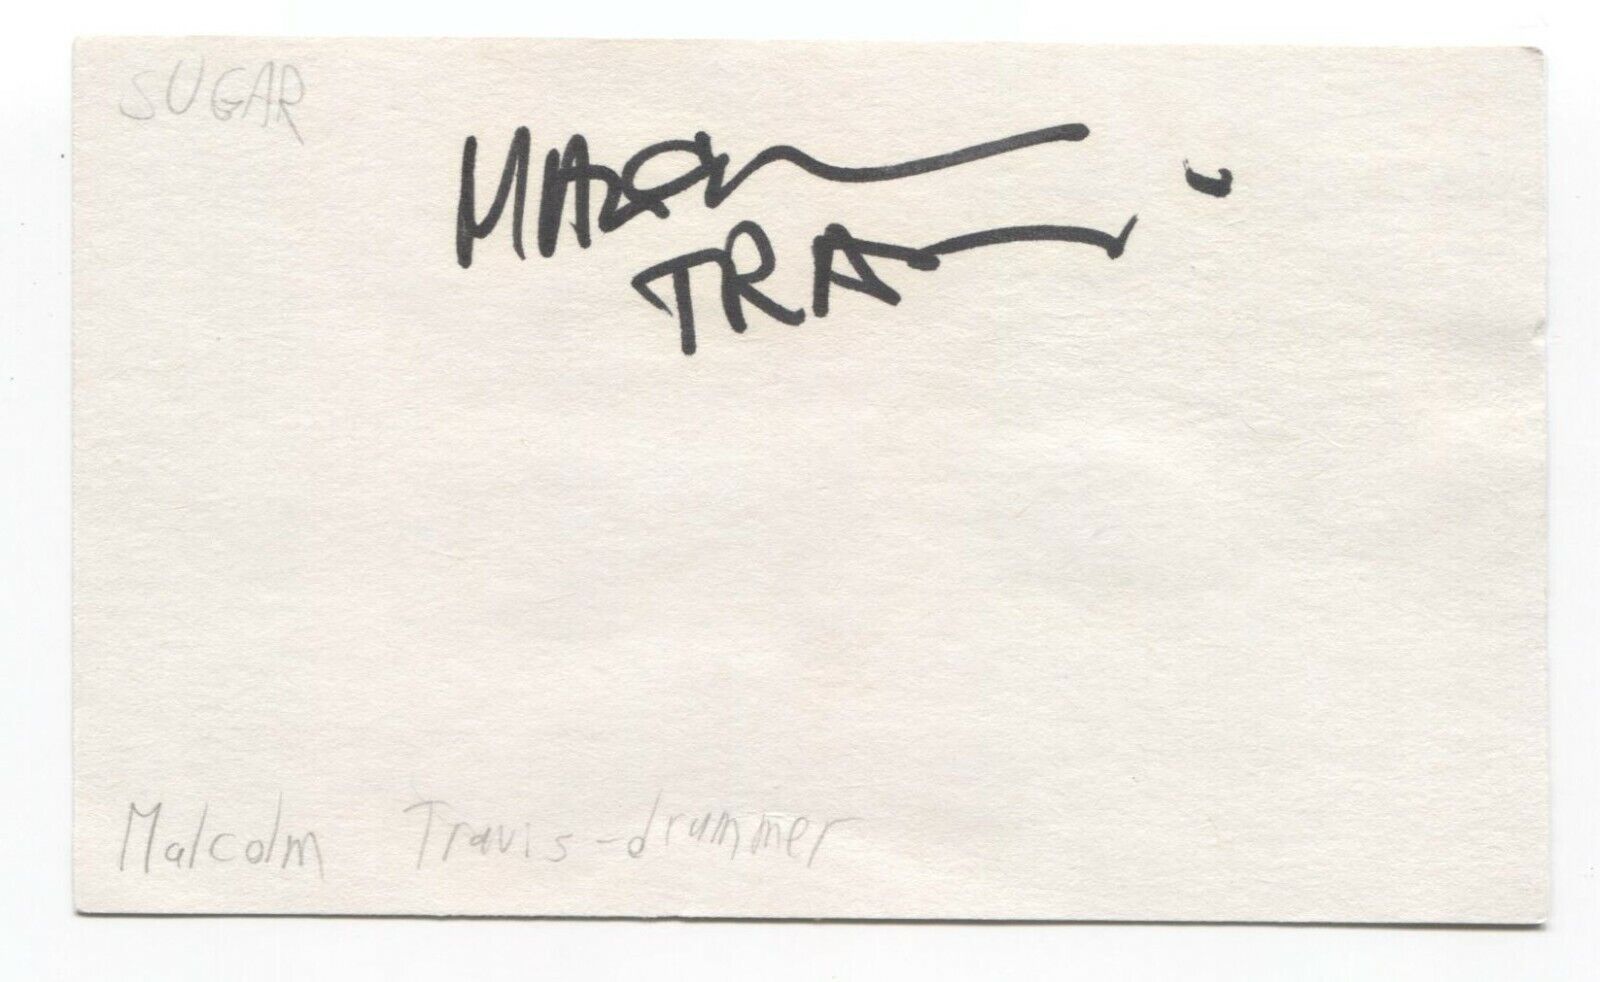 Malcom Travis Signed 3x5 Index Card Autographed Human Sexual Response Band